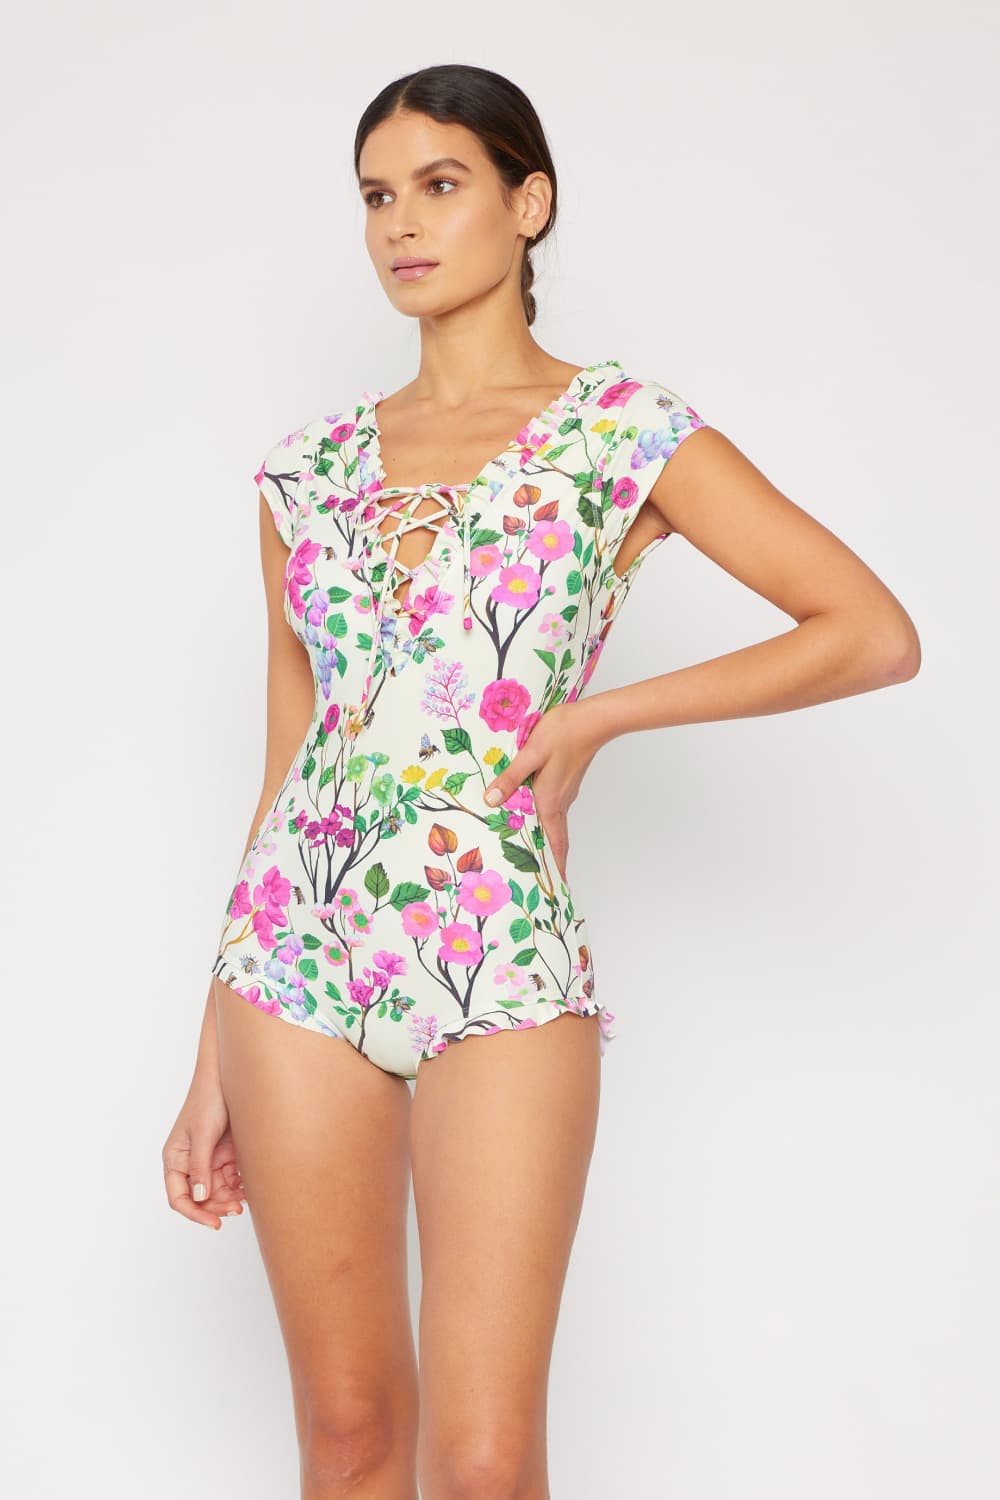 Bring Me Flowers V-Neck One Piece Swimsuit